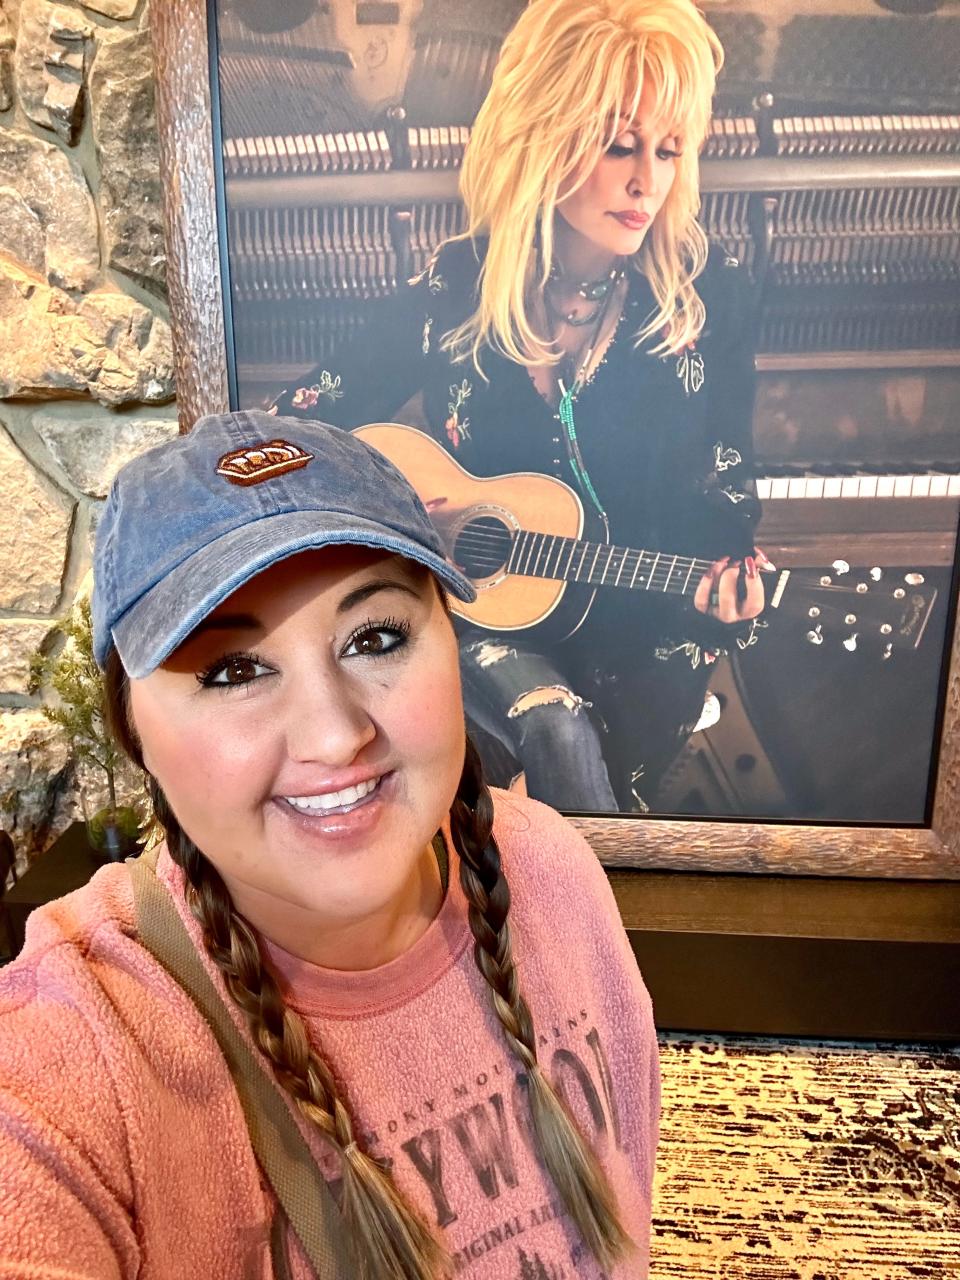 Author Carly Caramanna wearing a cinnamon bread hat and smiling in front of a framed portrait of Dolly Parton at HeartSong resort